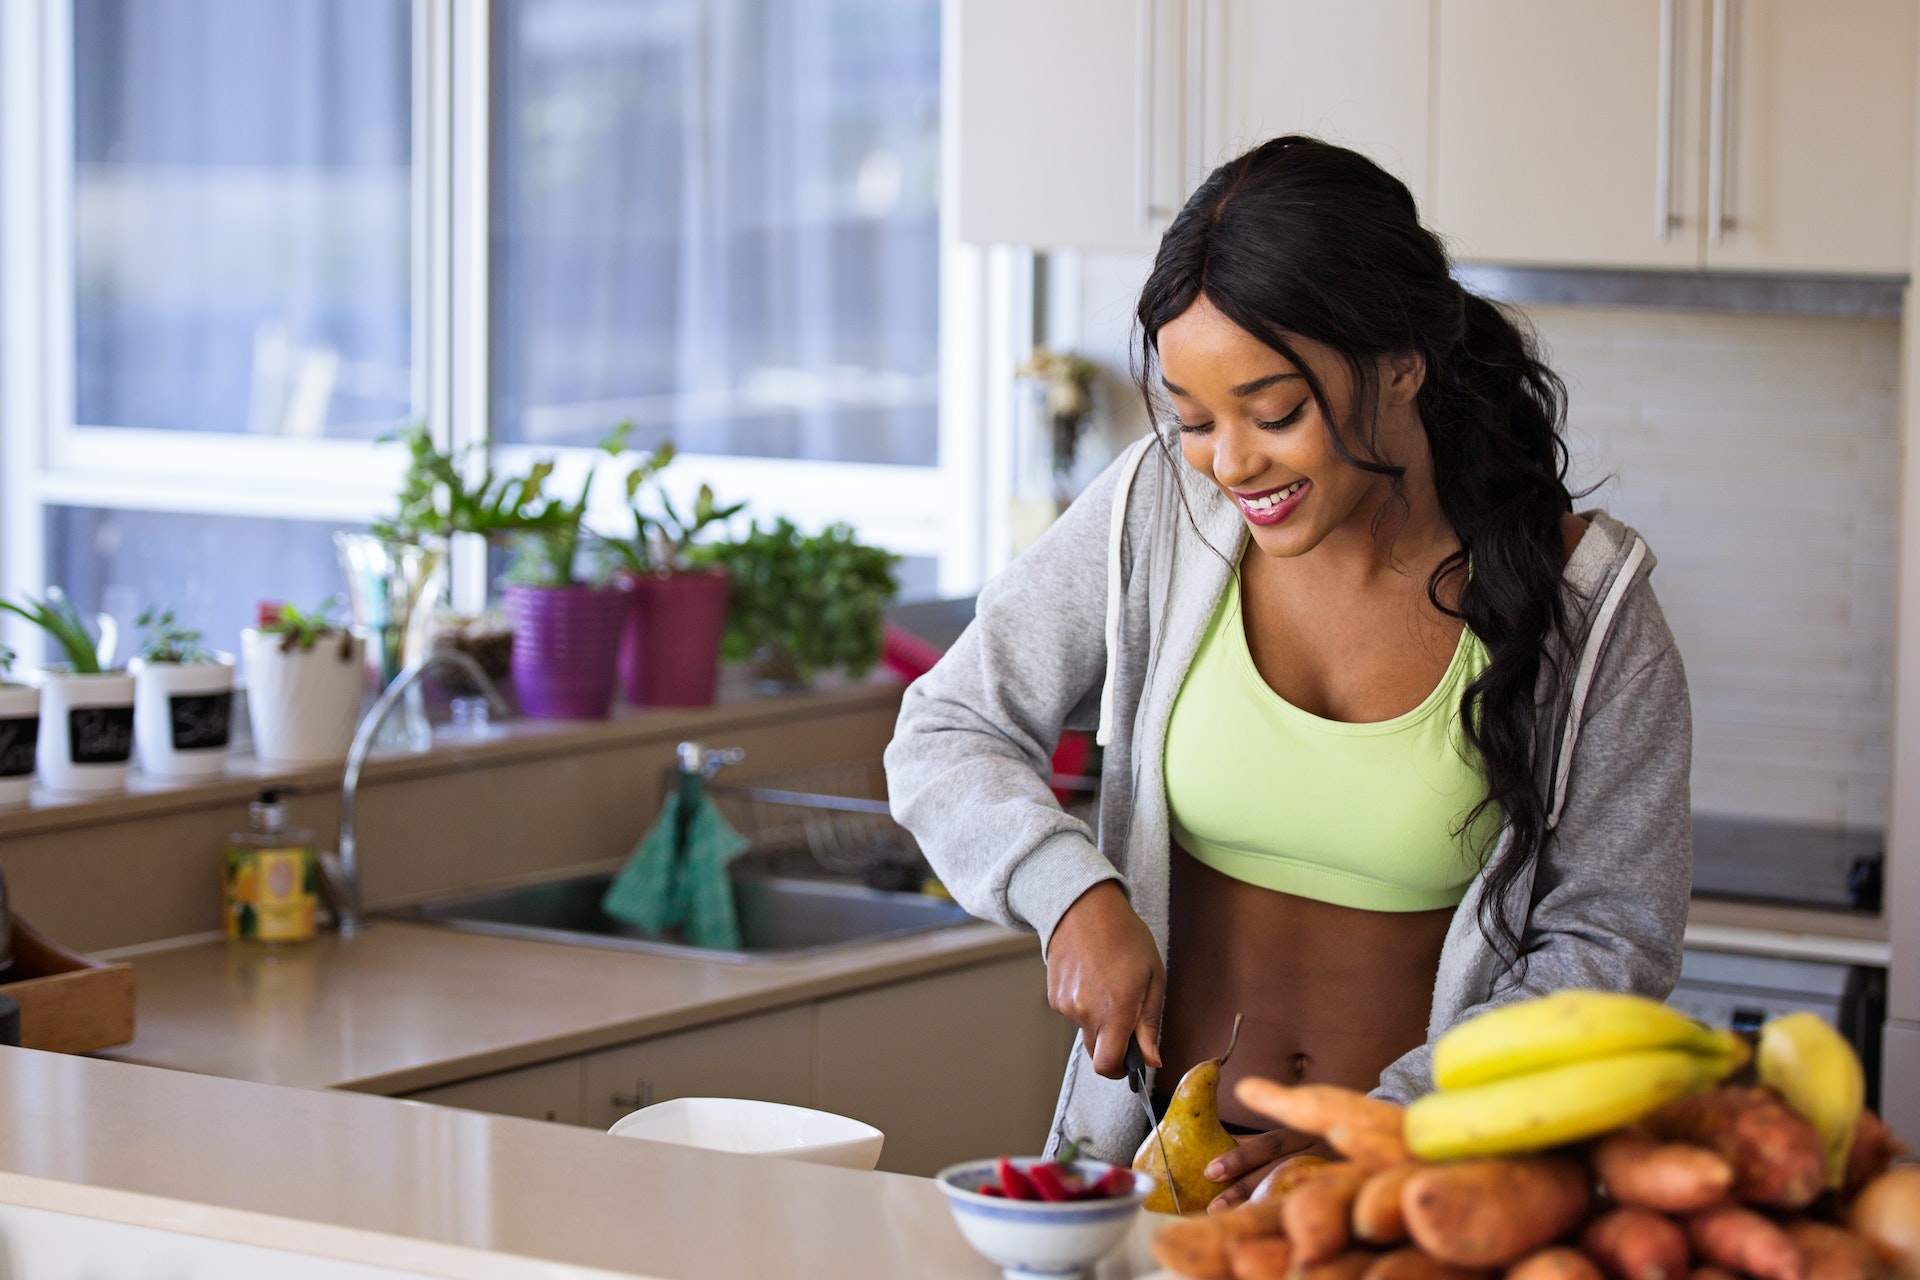 How to Use Food To Reach Your Health Goals